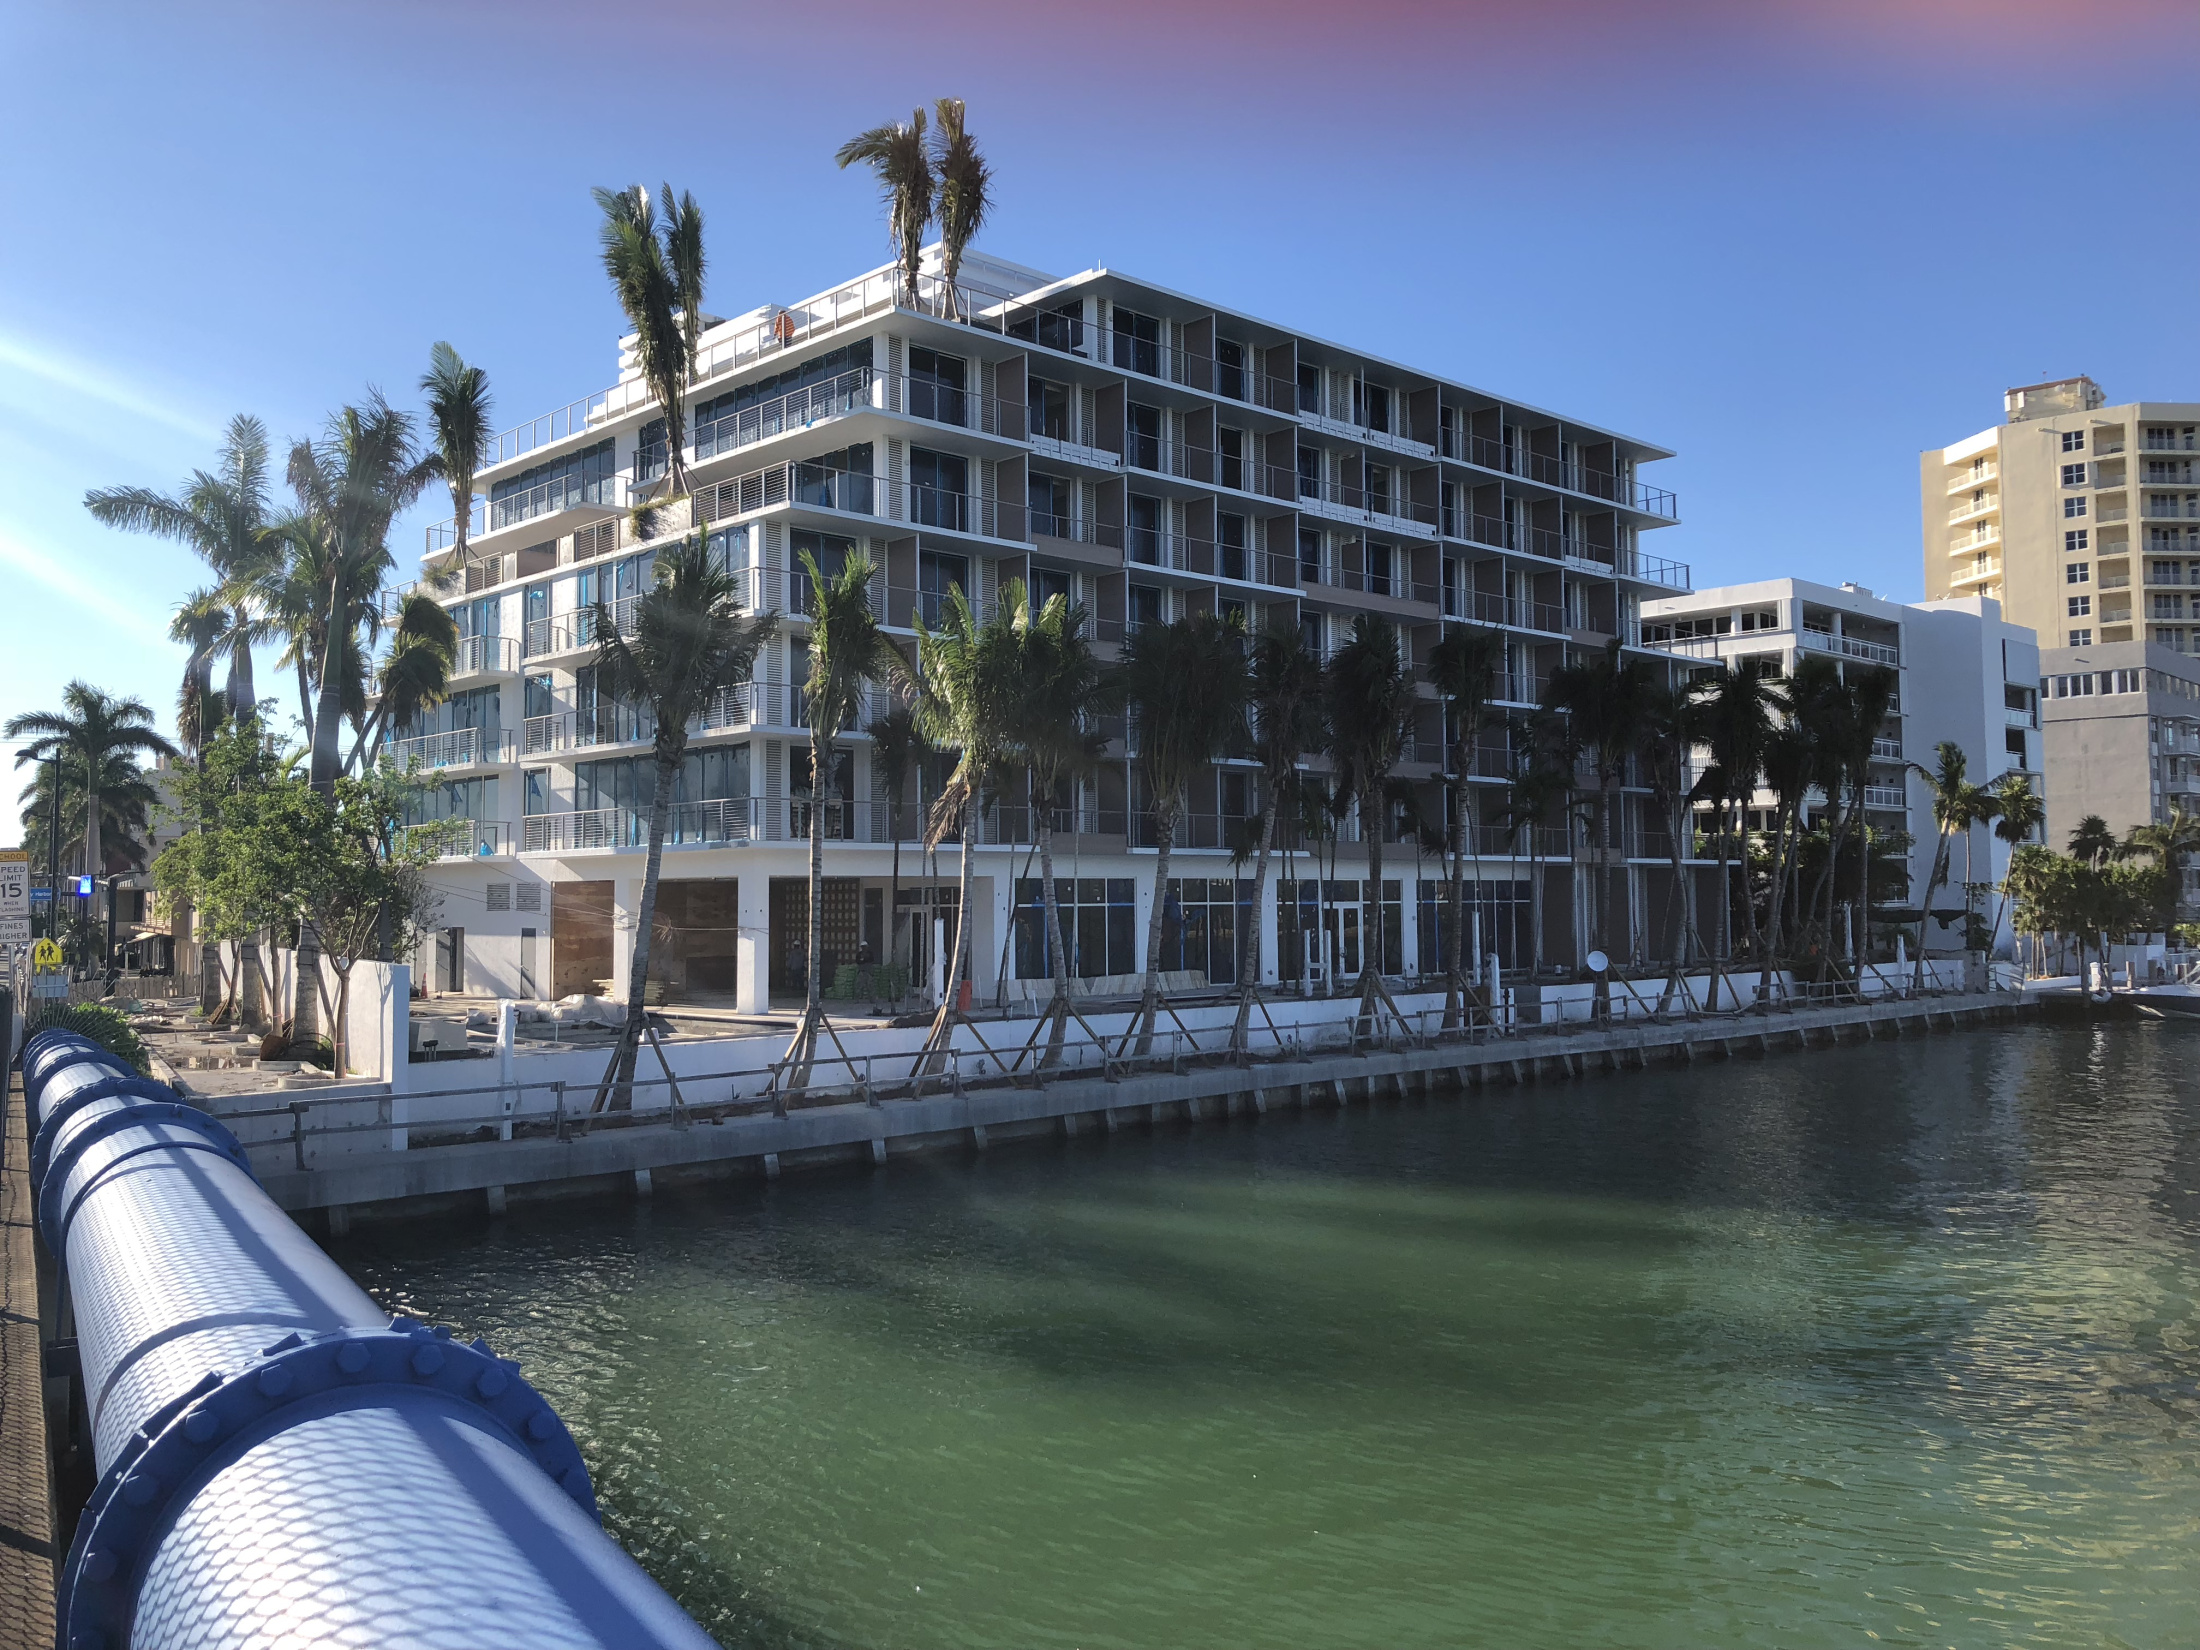 On the waterfront: The Grand Beach Hotel Bay Harbor, with 96 suites on 6 floors, relied on Penetron for an effective concrete mix to solve the moisture issues and dewatering problems of the job site.